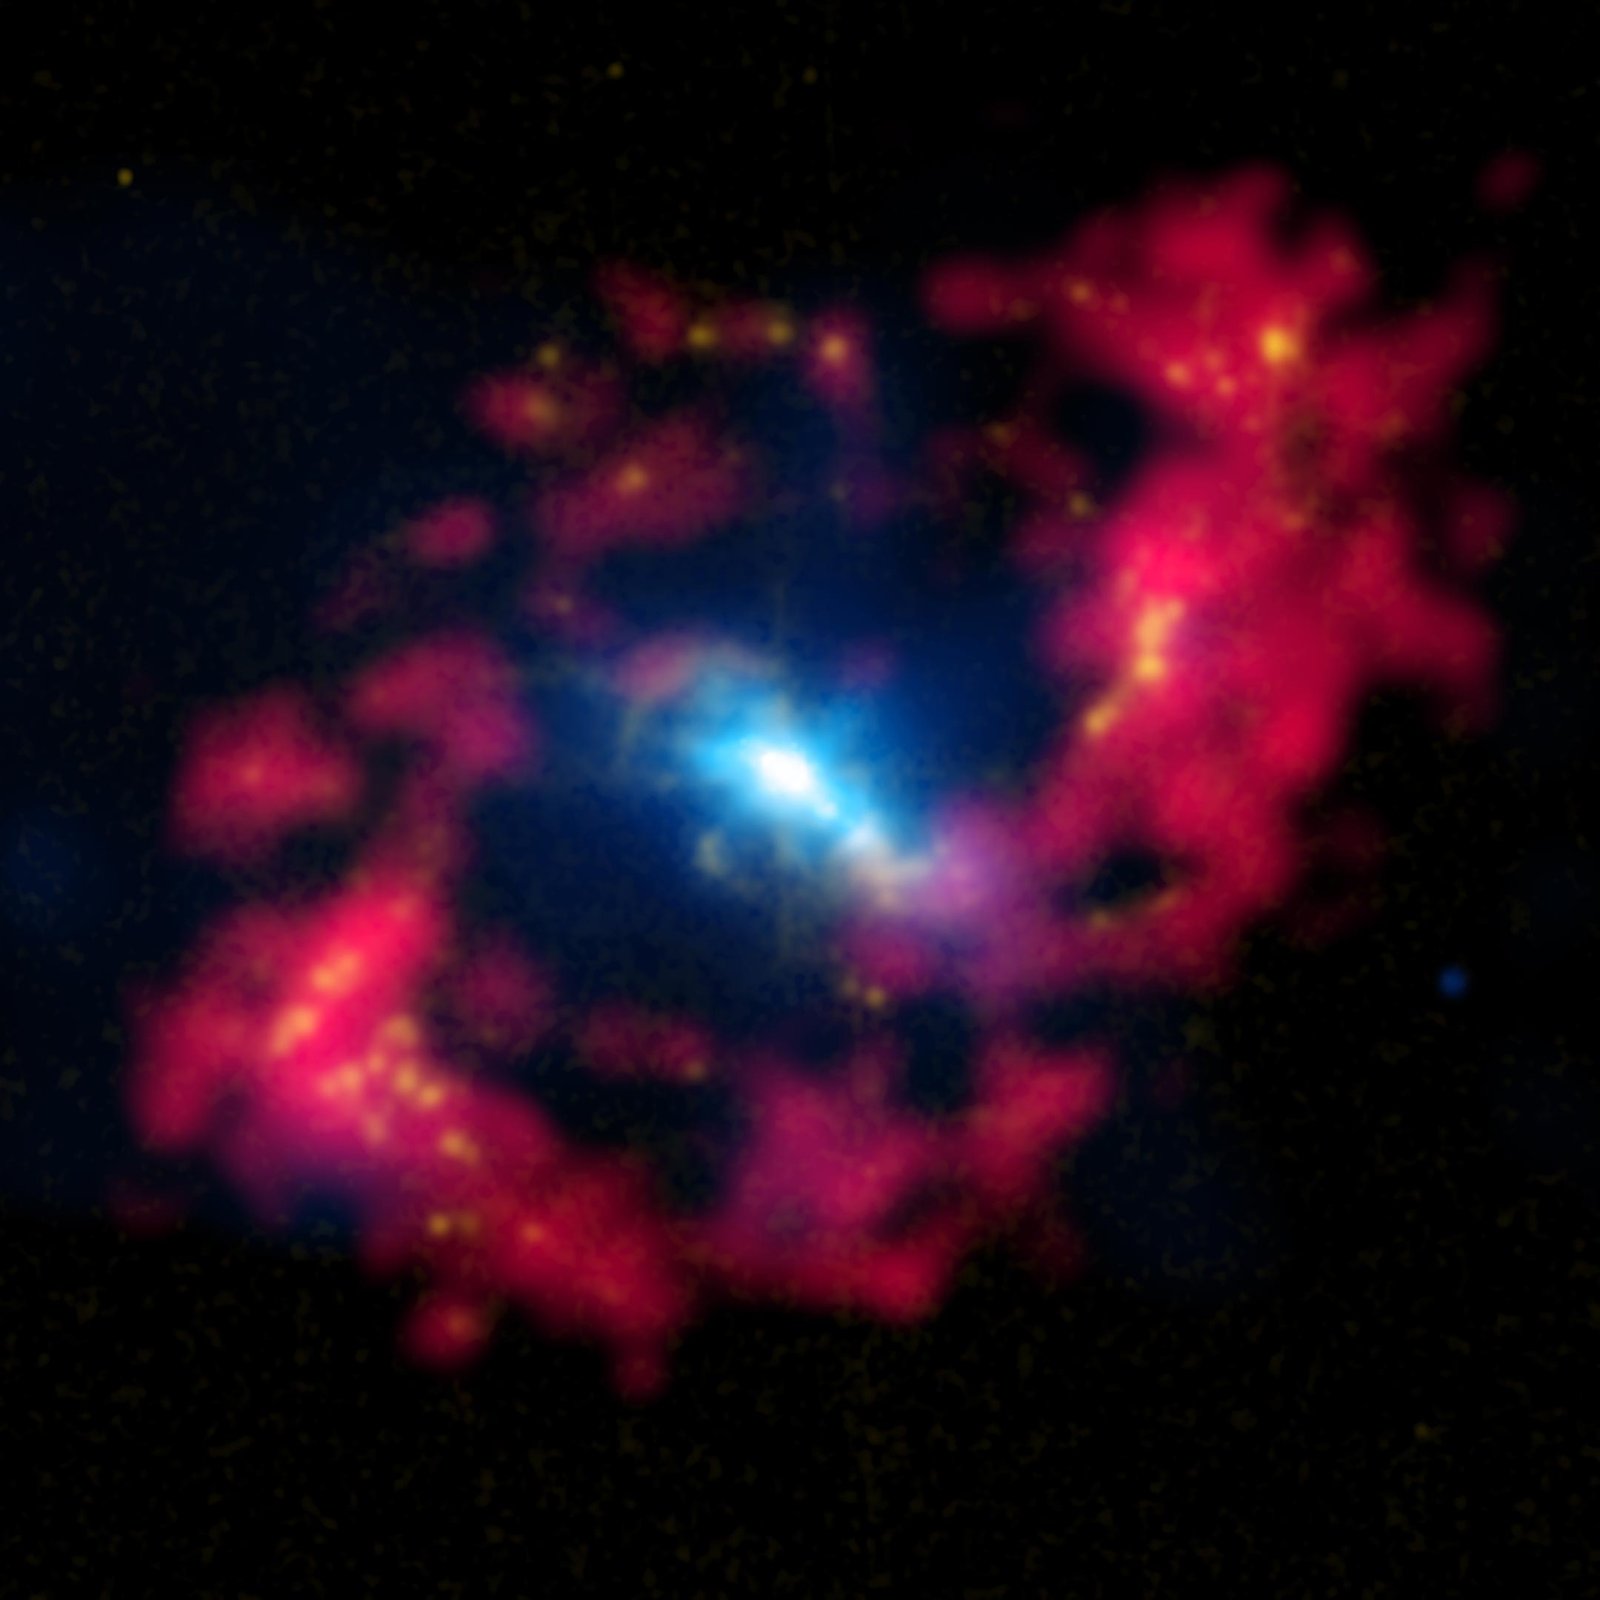 XRISM Spacecraft Detects Iron Signatures in Nearby Active Galaxy